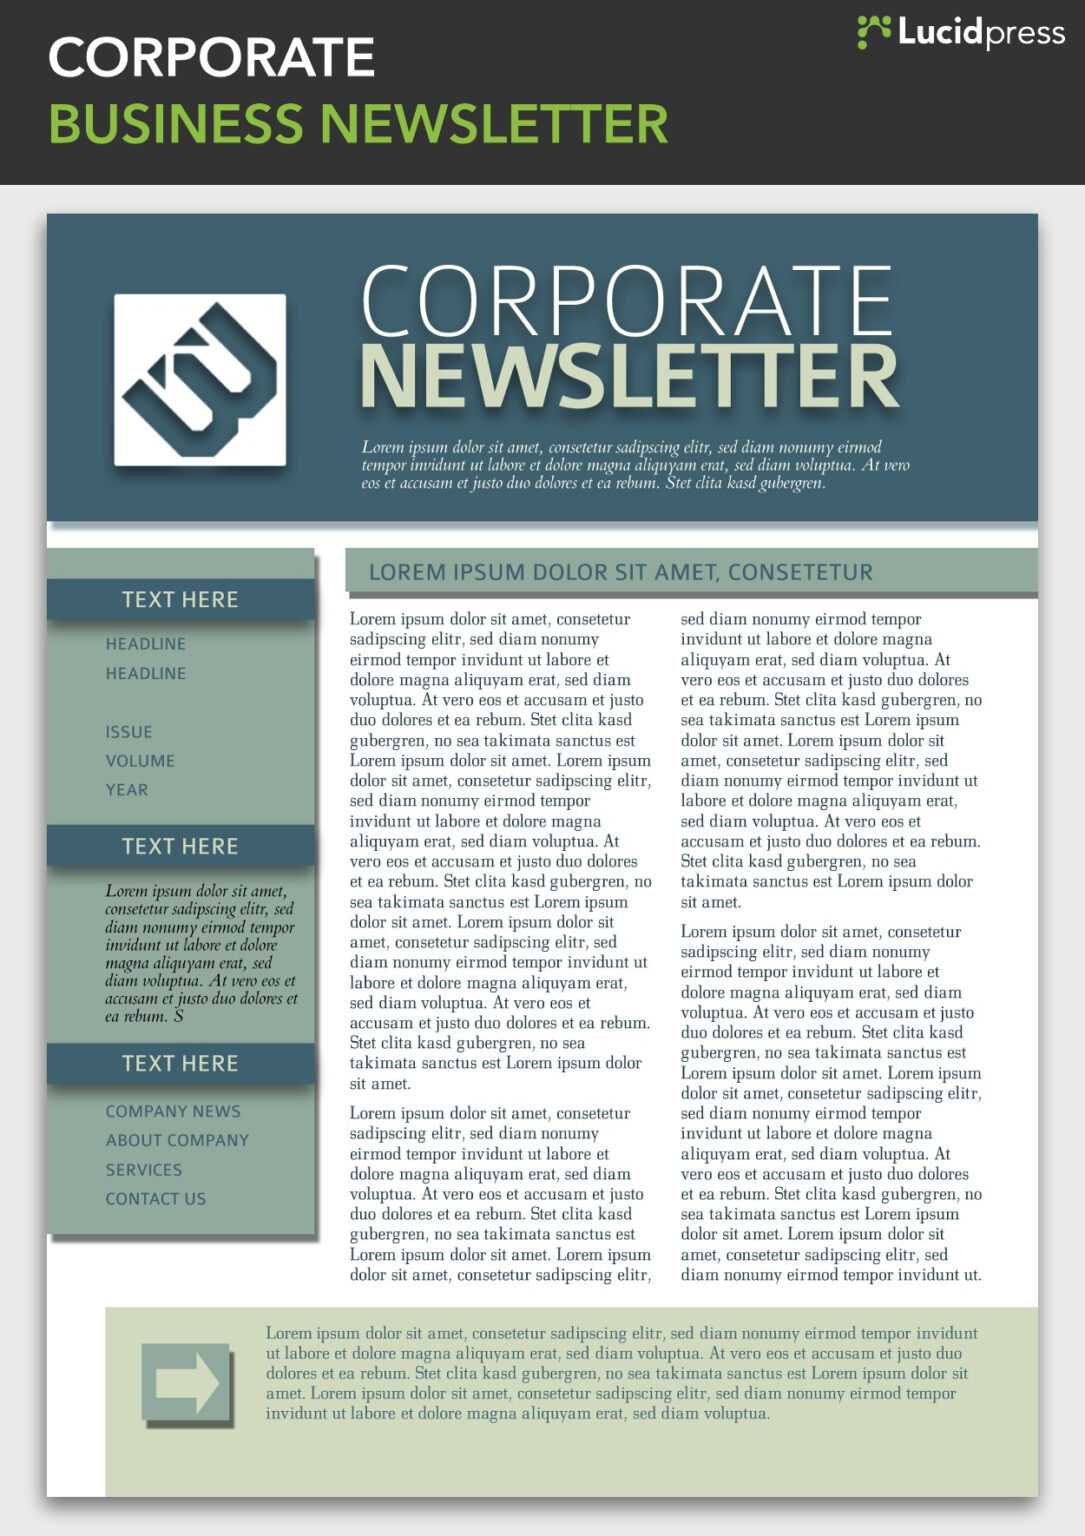 examples of company newsletters